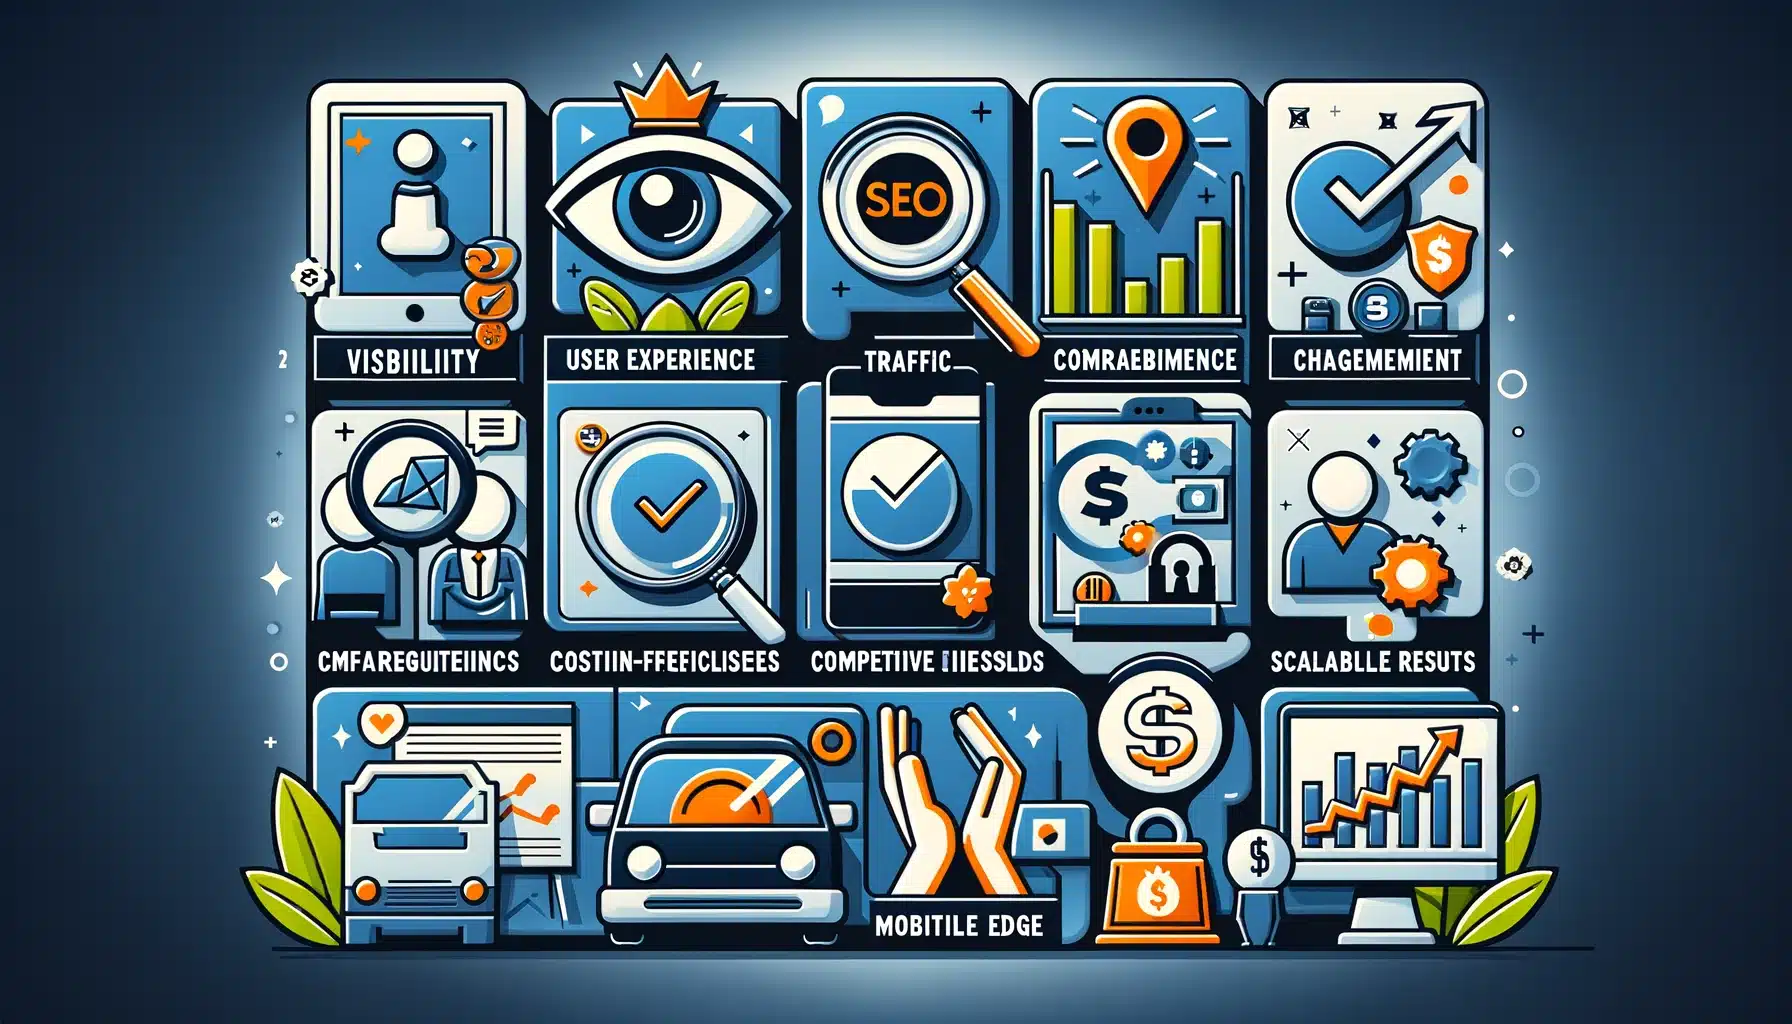 a visual representation of the benefits of seo using simple and clear icons. the image includes icons for visibility with an eye, traffic with cars, u